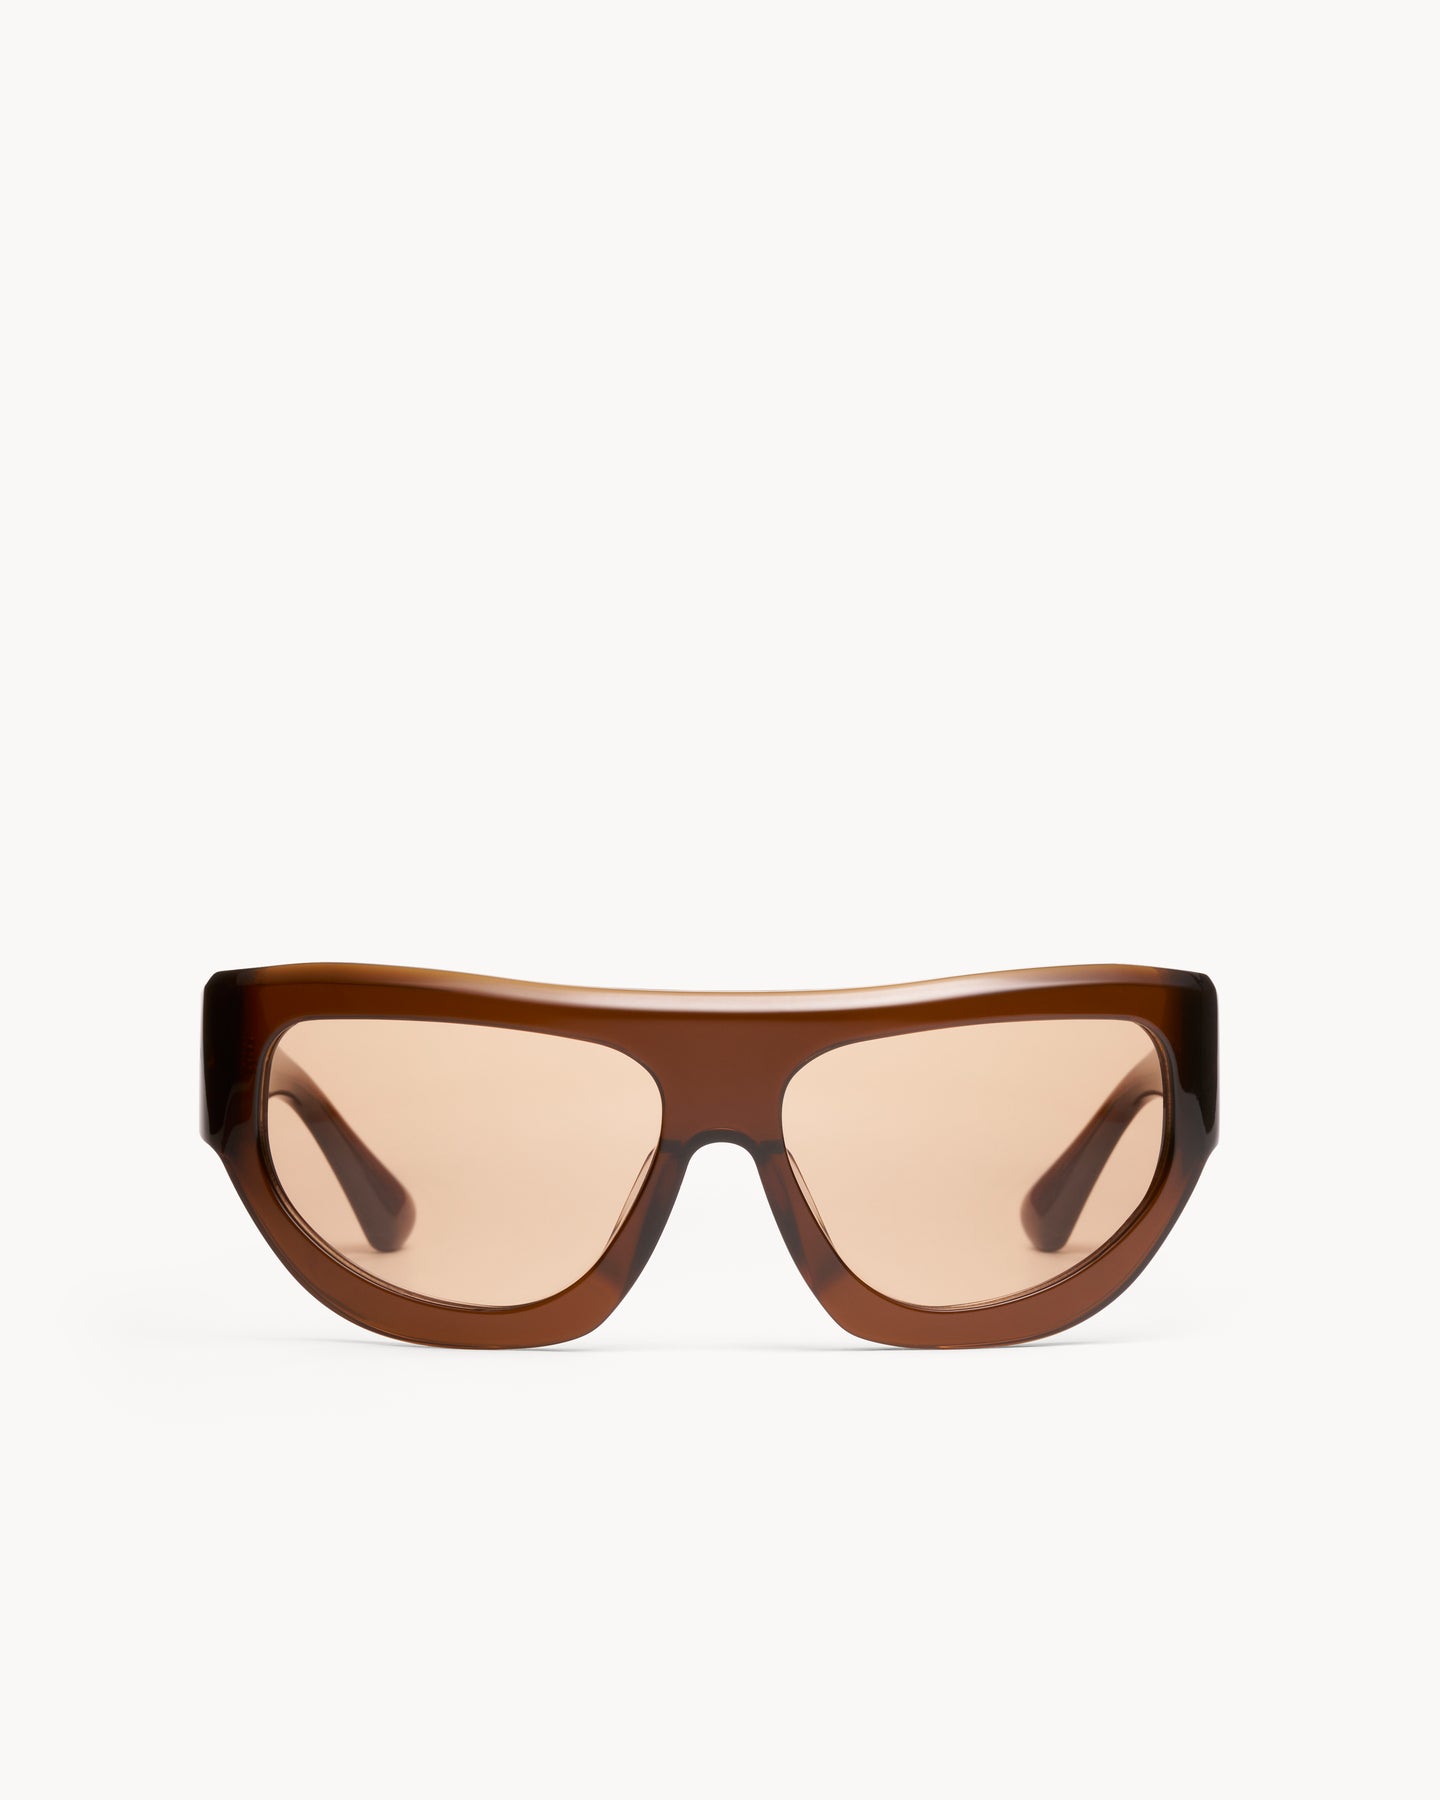 Port Tanger Dost Sunglasses in Bunaa Acetate and Amber Lenses 1